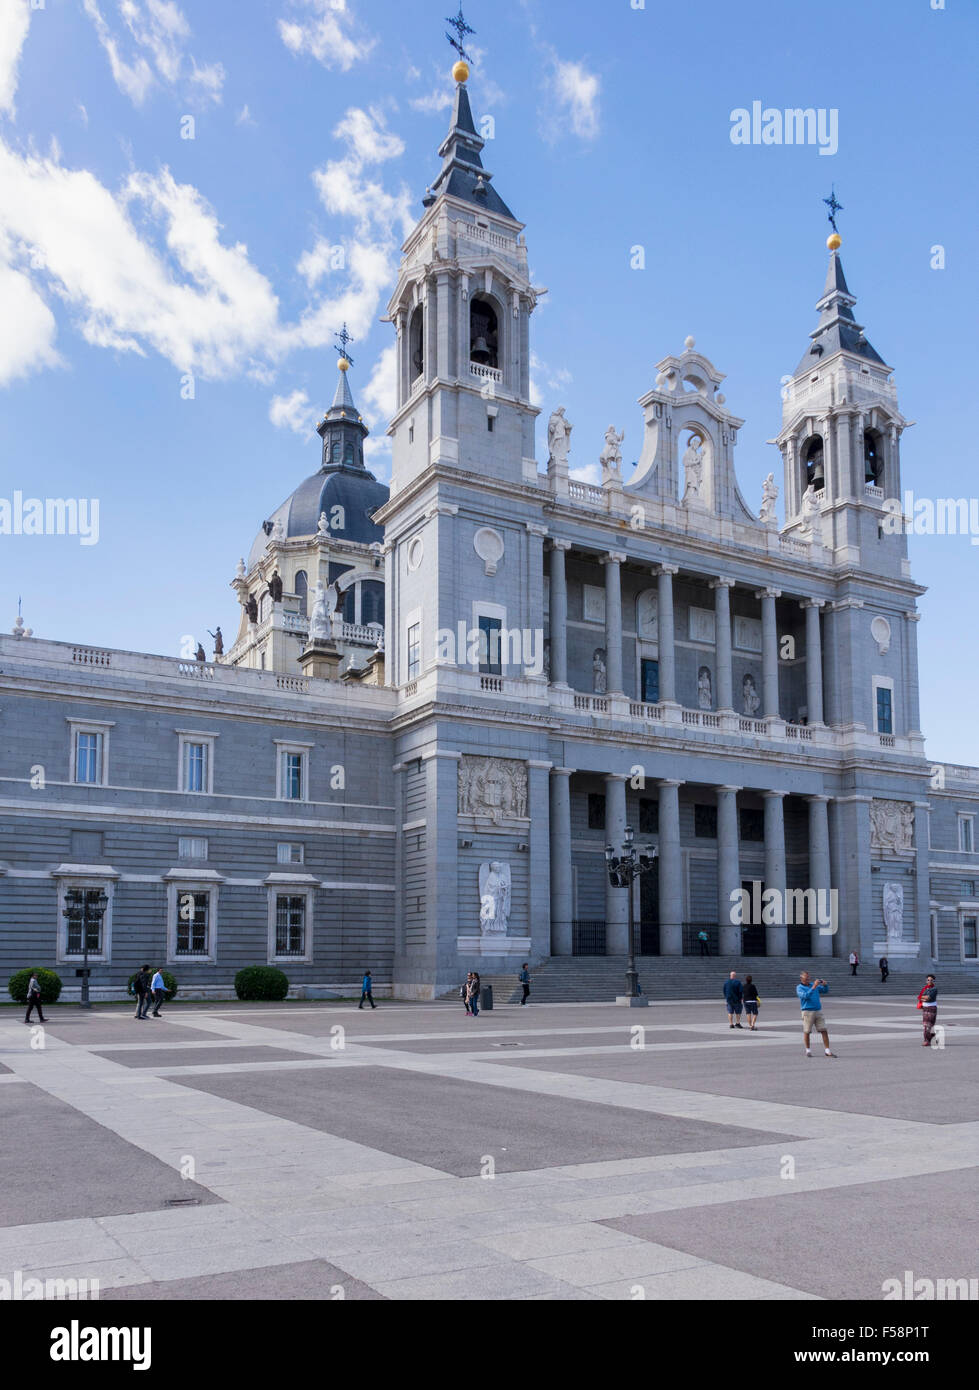 Almudena Cathedral in Madrid city center, Spain, Europe Stock Photo